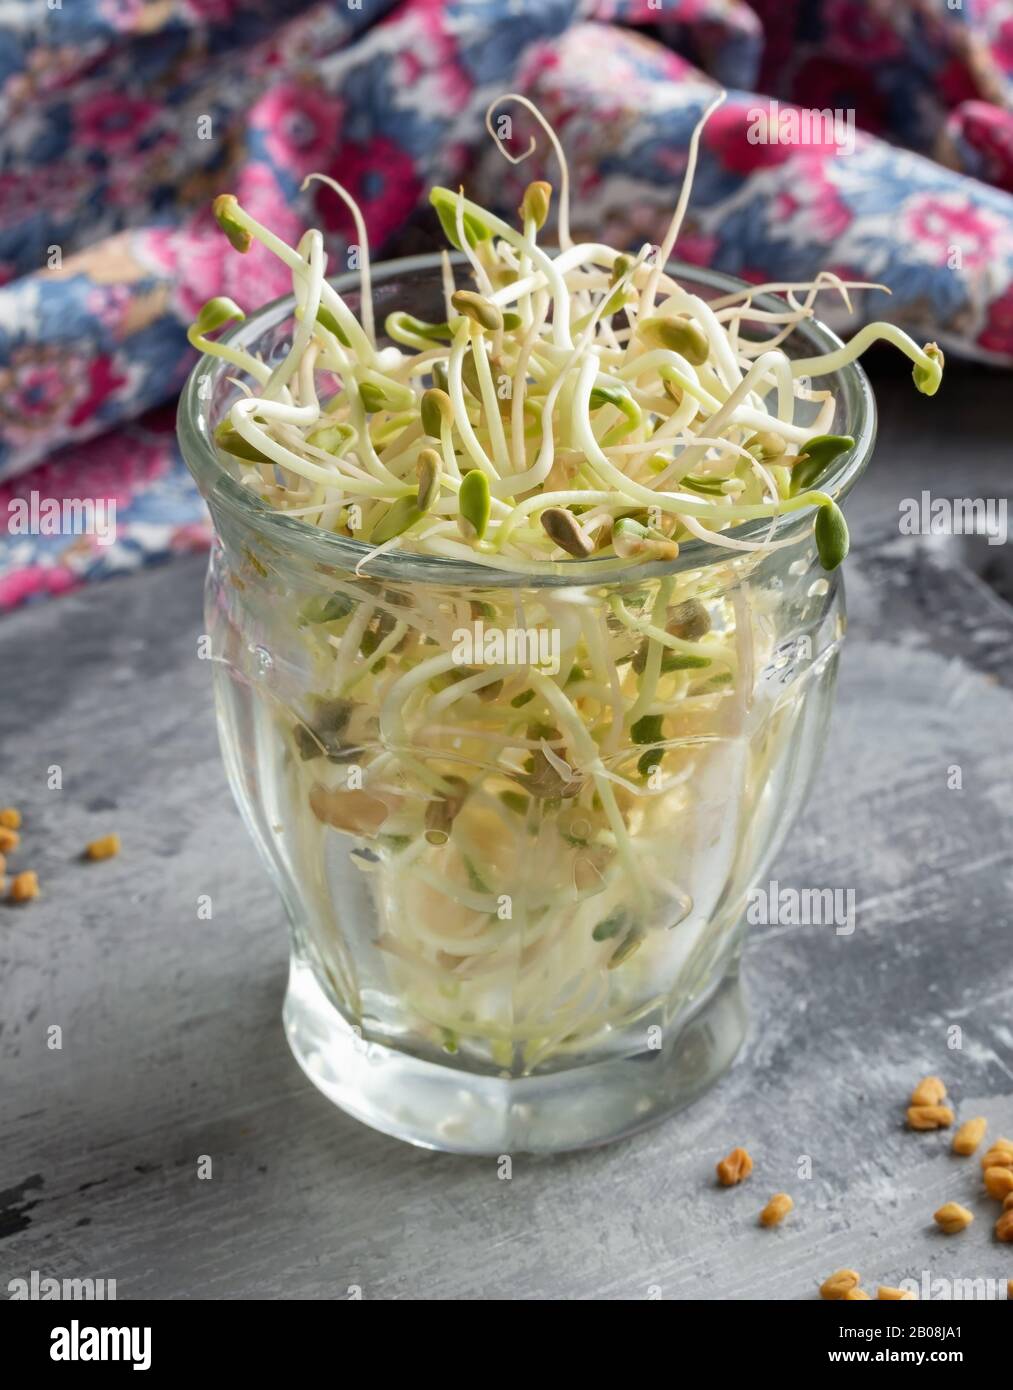 Fresh fenugreek sprouts in a glass, with dry seeds in the foreground Stock Photo